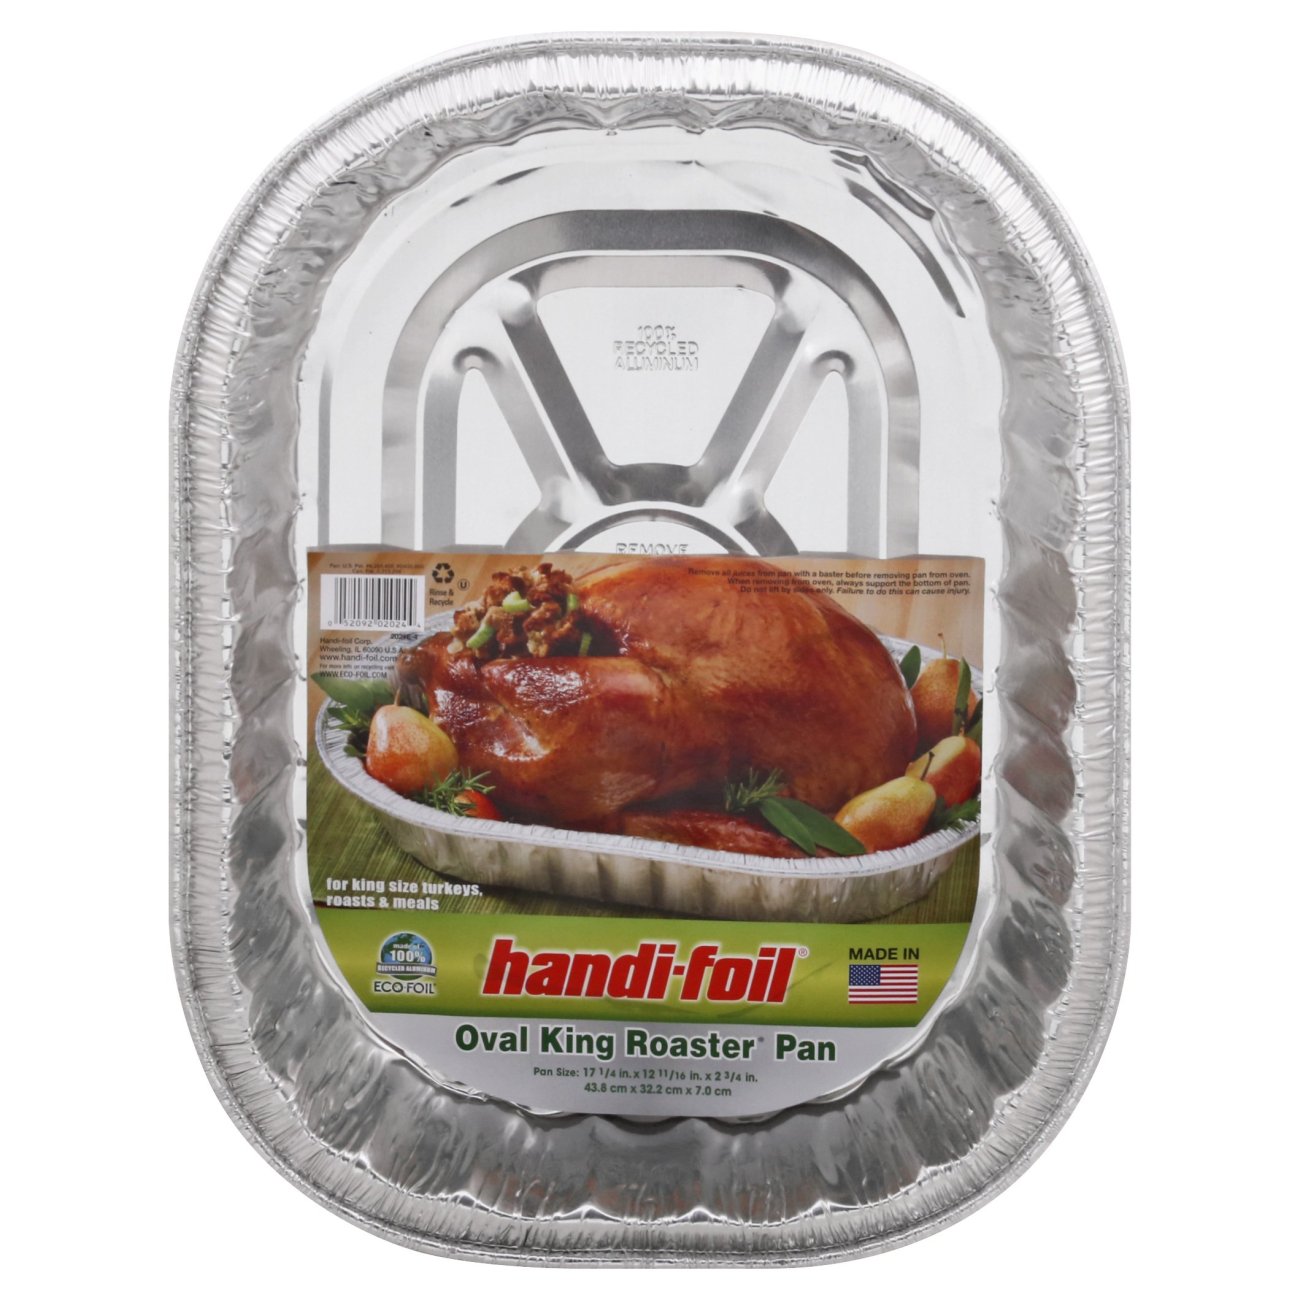 Strong and reliable roasters of various sizes from Handi-foil